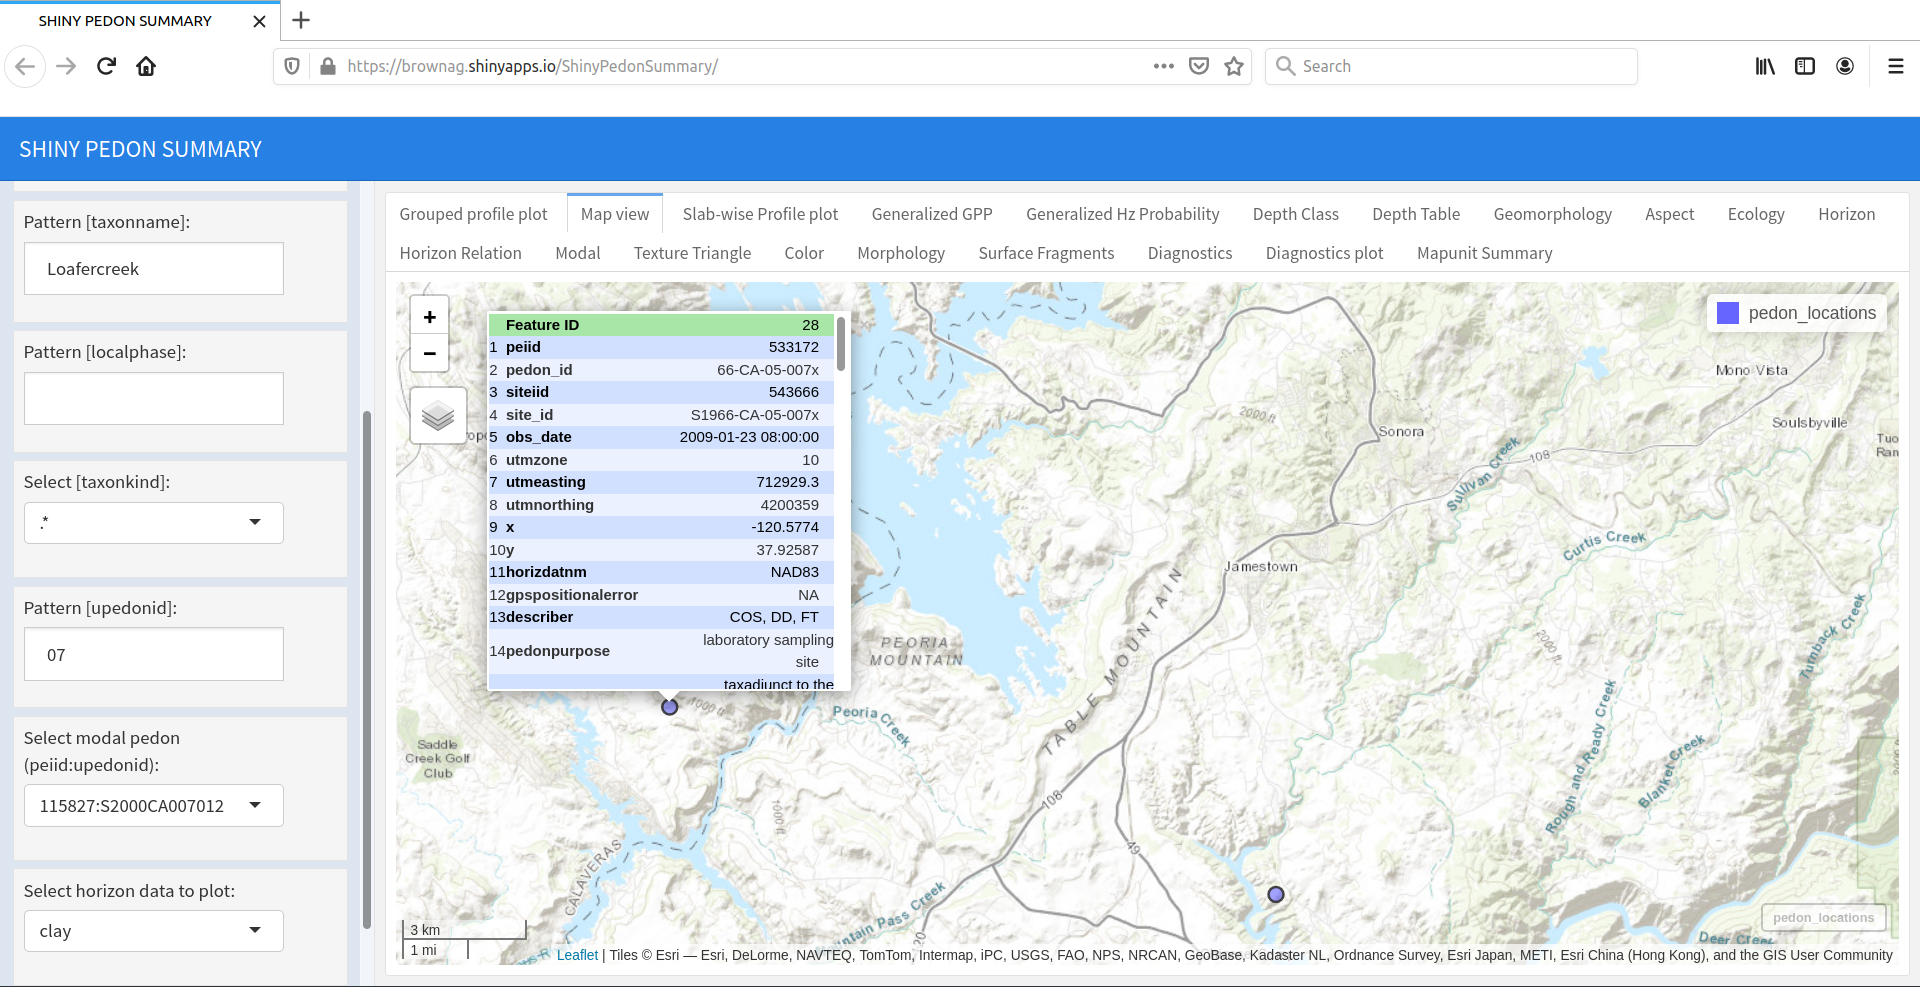 Extending the capabilities of the report with interactive widgets has only begun to be explored with the mapview package. Much useful information about profiles in a SoilProfileCollection can be determined by the filter-pan-click method